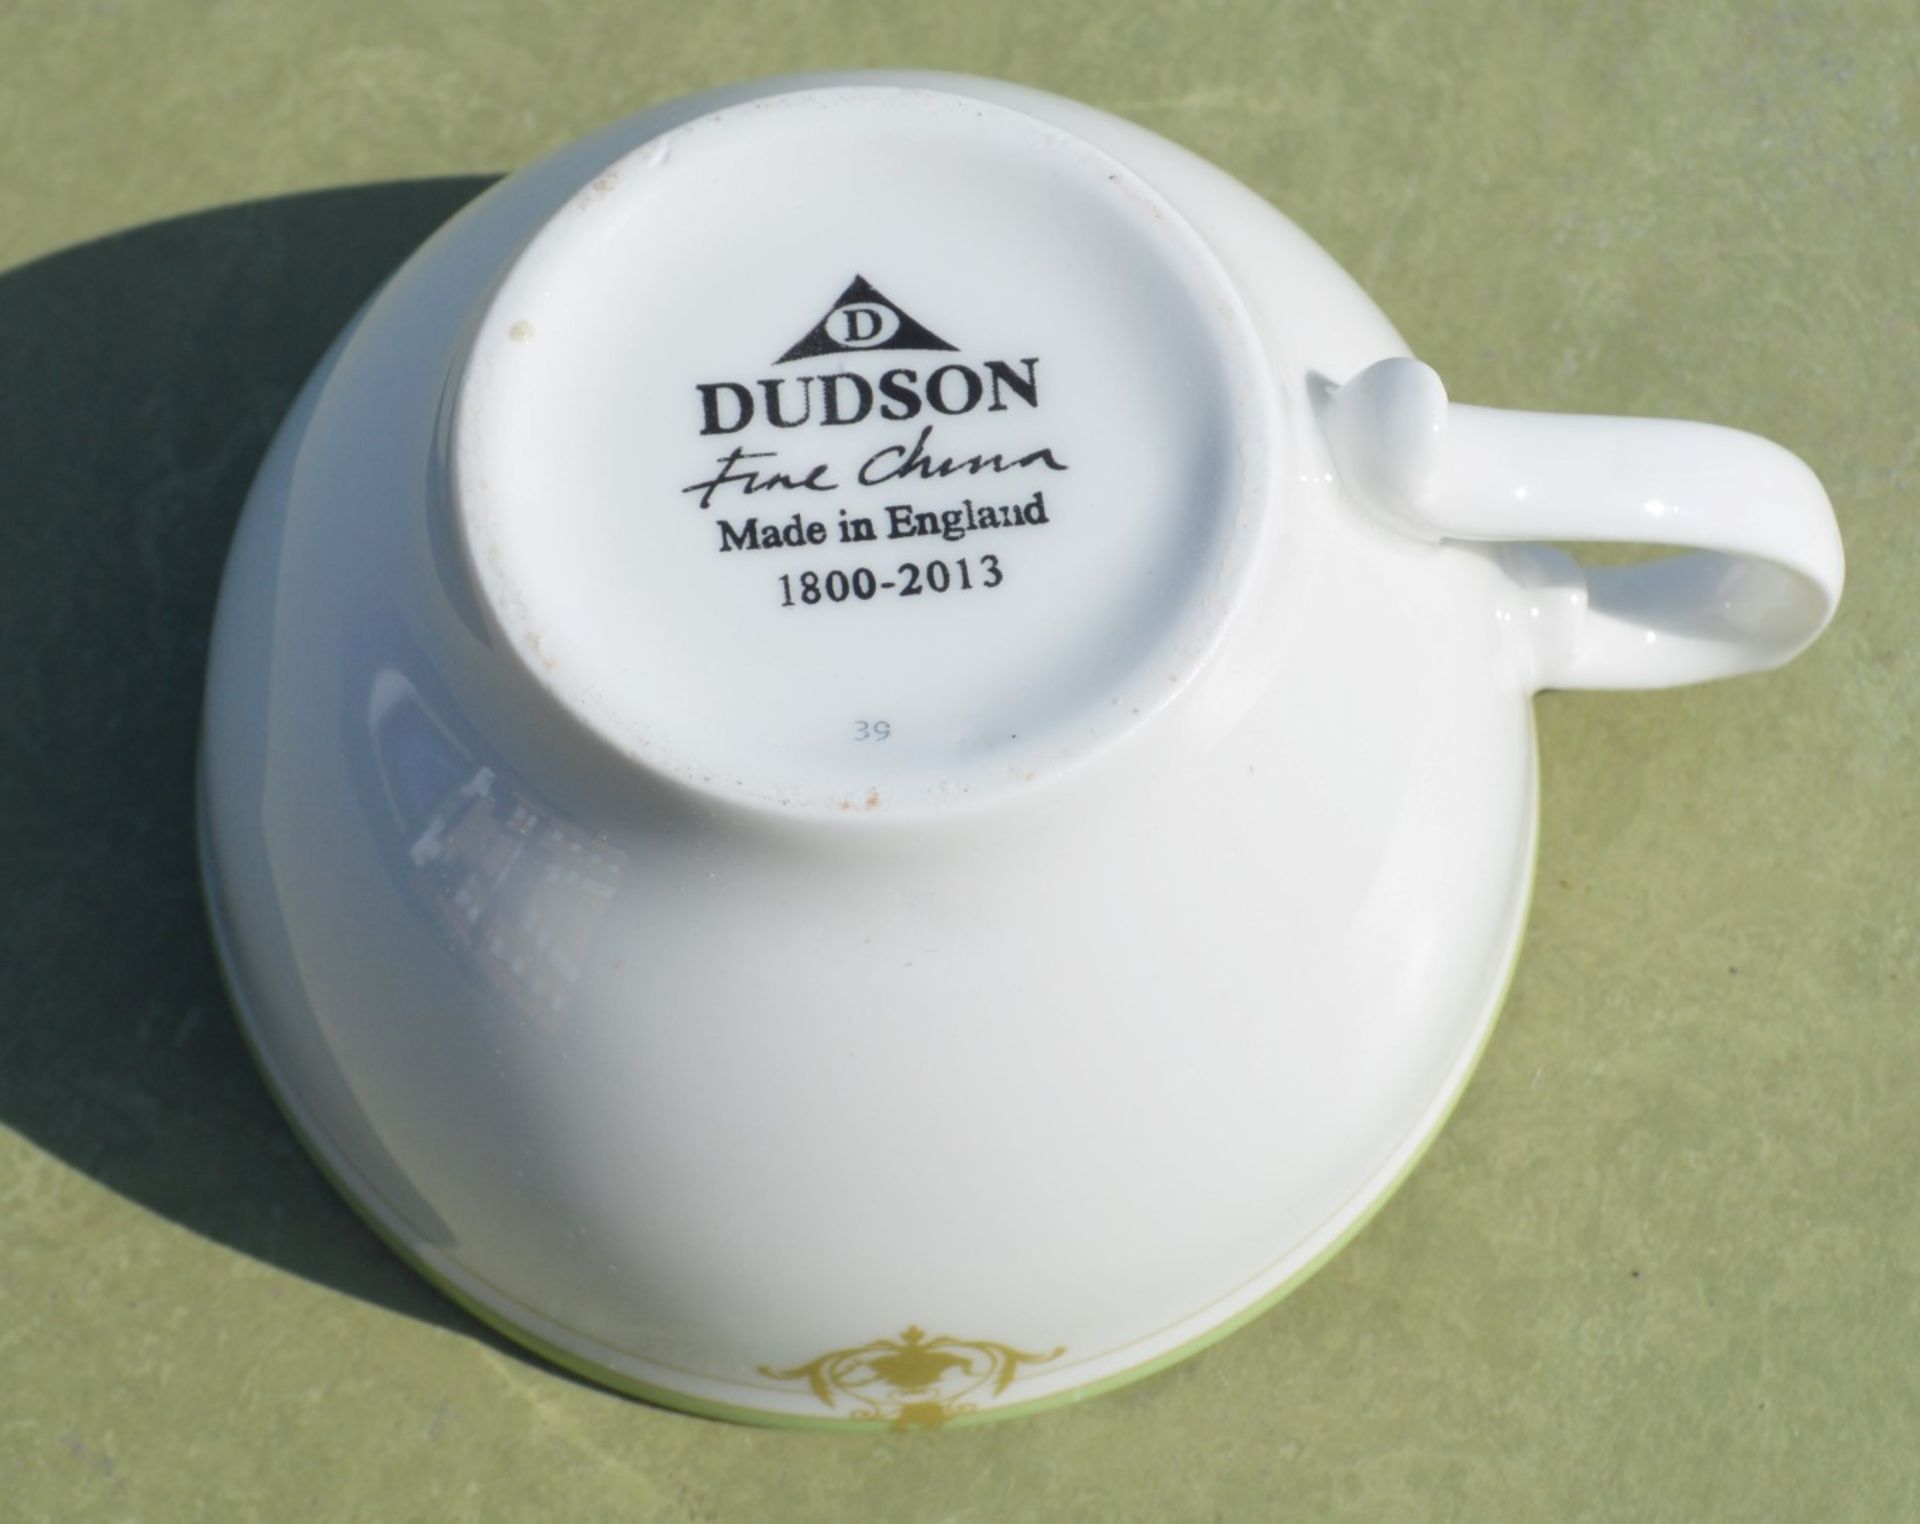 36 x DUDSON Fine China 'Georgian' Low Tea Cups With With Saucers All Featuring 'Famous Branding' - - Image 4 of 9